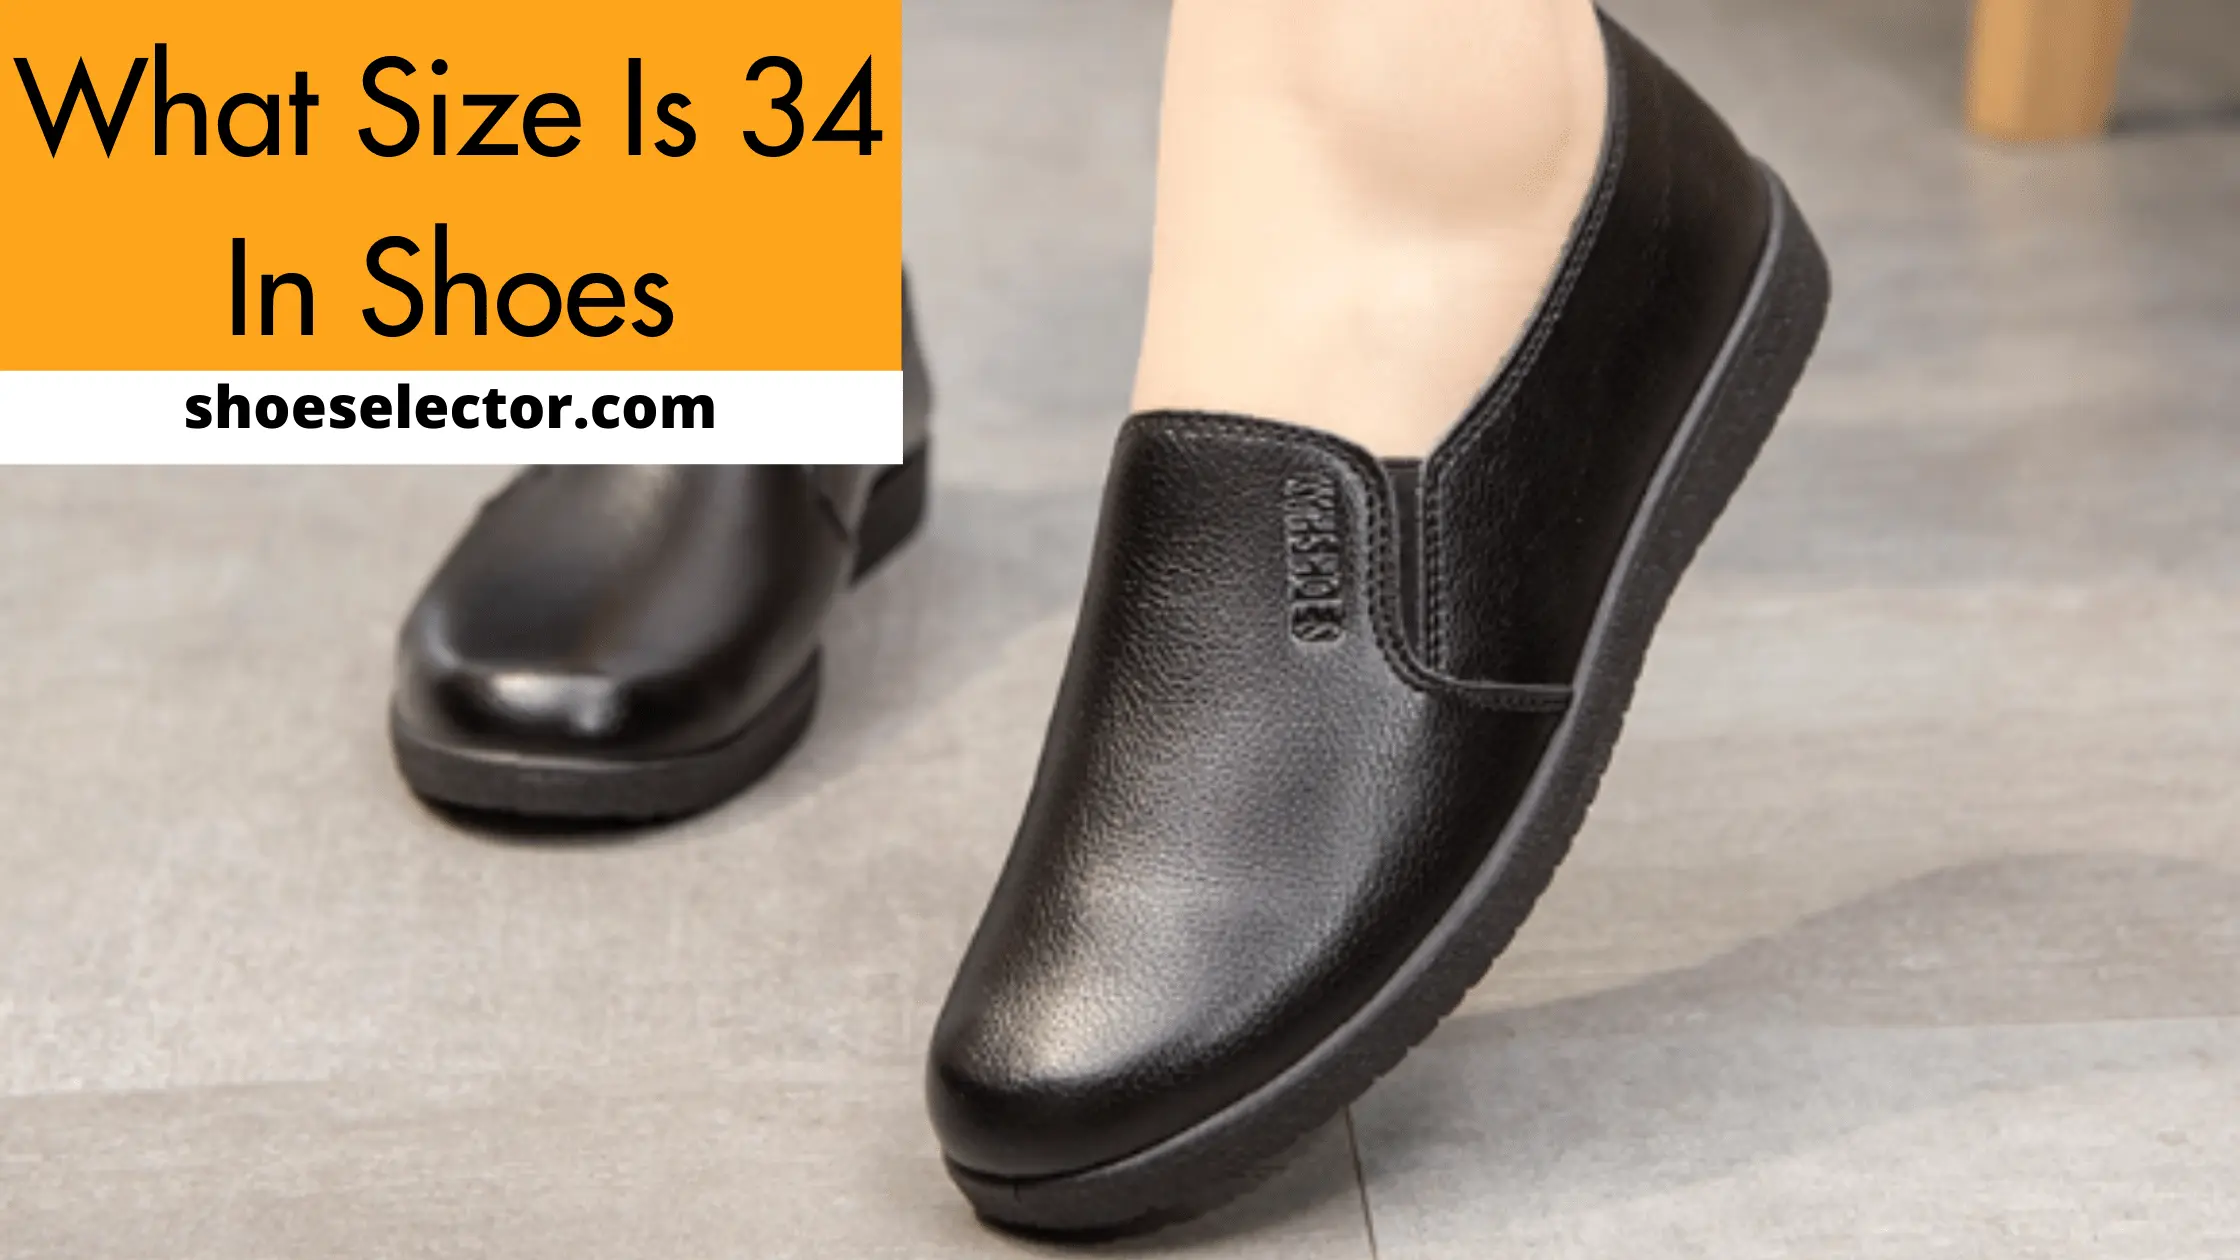 What Size Is 34 In Shoes? - Latest Guide